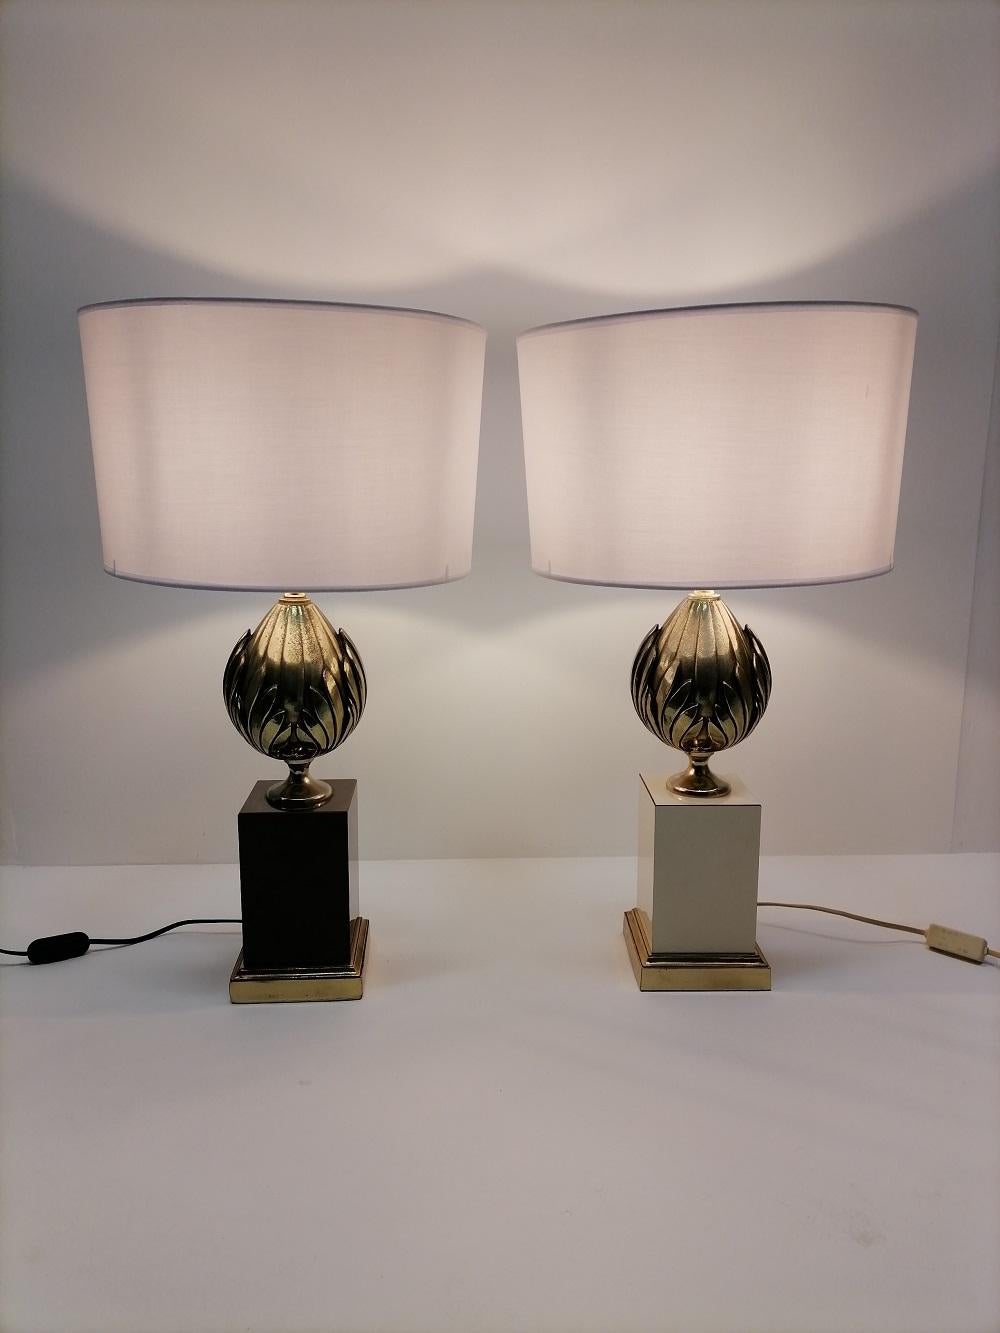 1970 French Midcentury Pair of Table Lamps in Maison Charles Style In Good Condition For Sale In Toulouse, Midi-Pyrénées